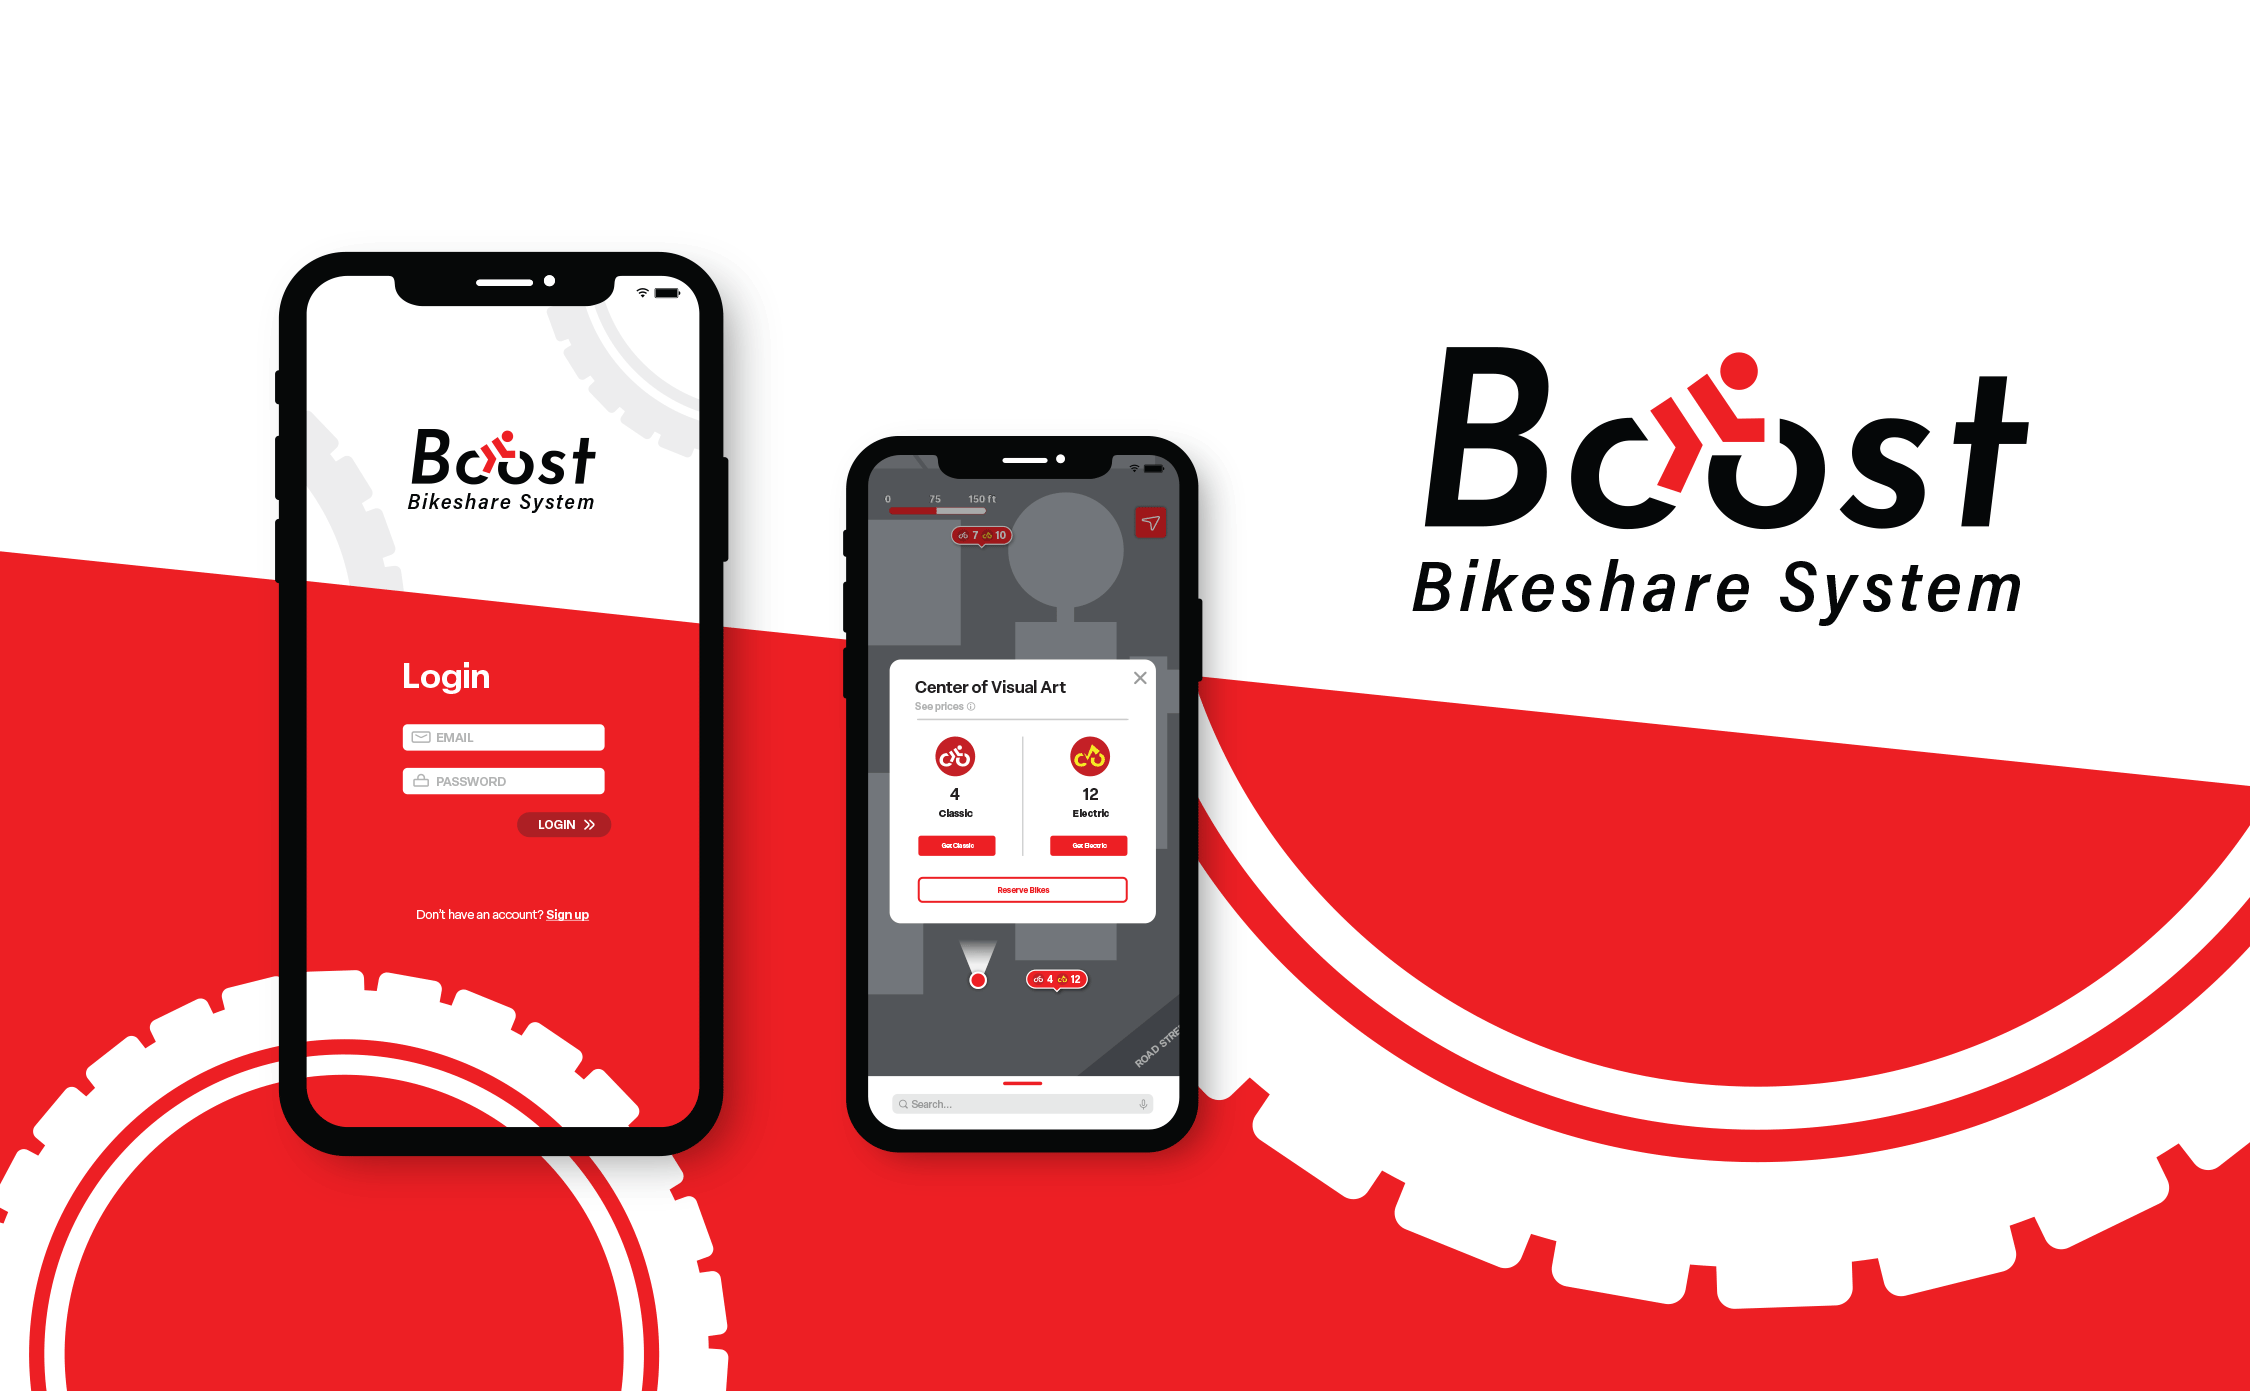 Boost Mobile, a bikeshare application. 2 Iphone mockups of the app in action with red background